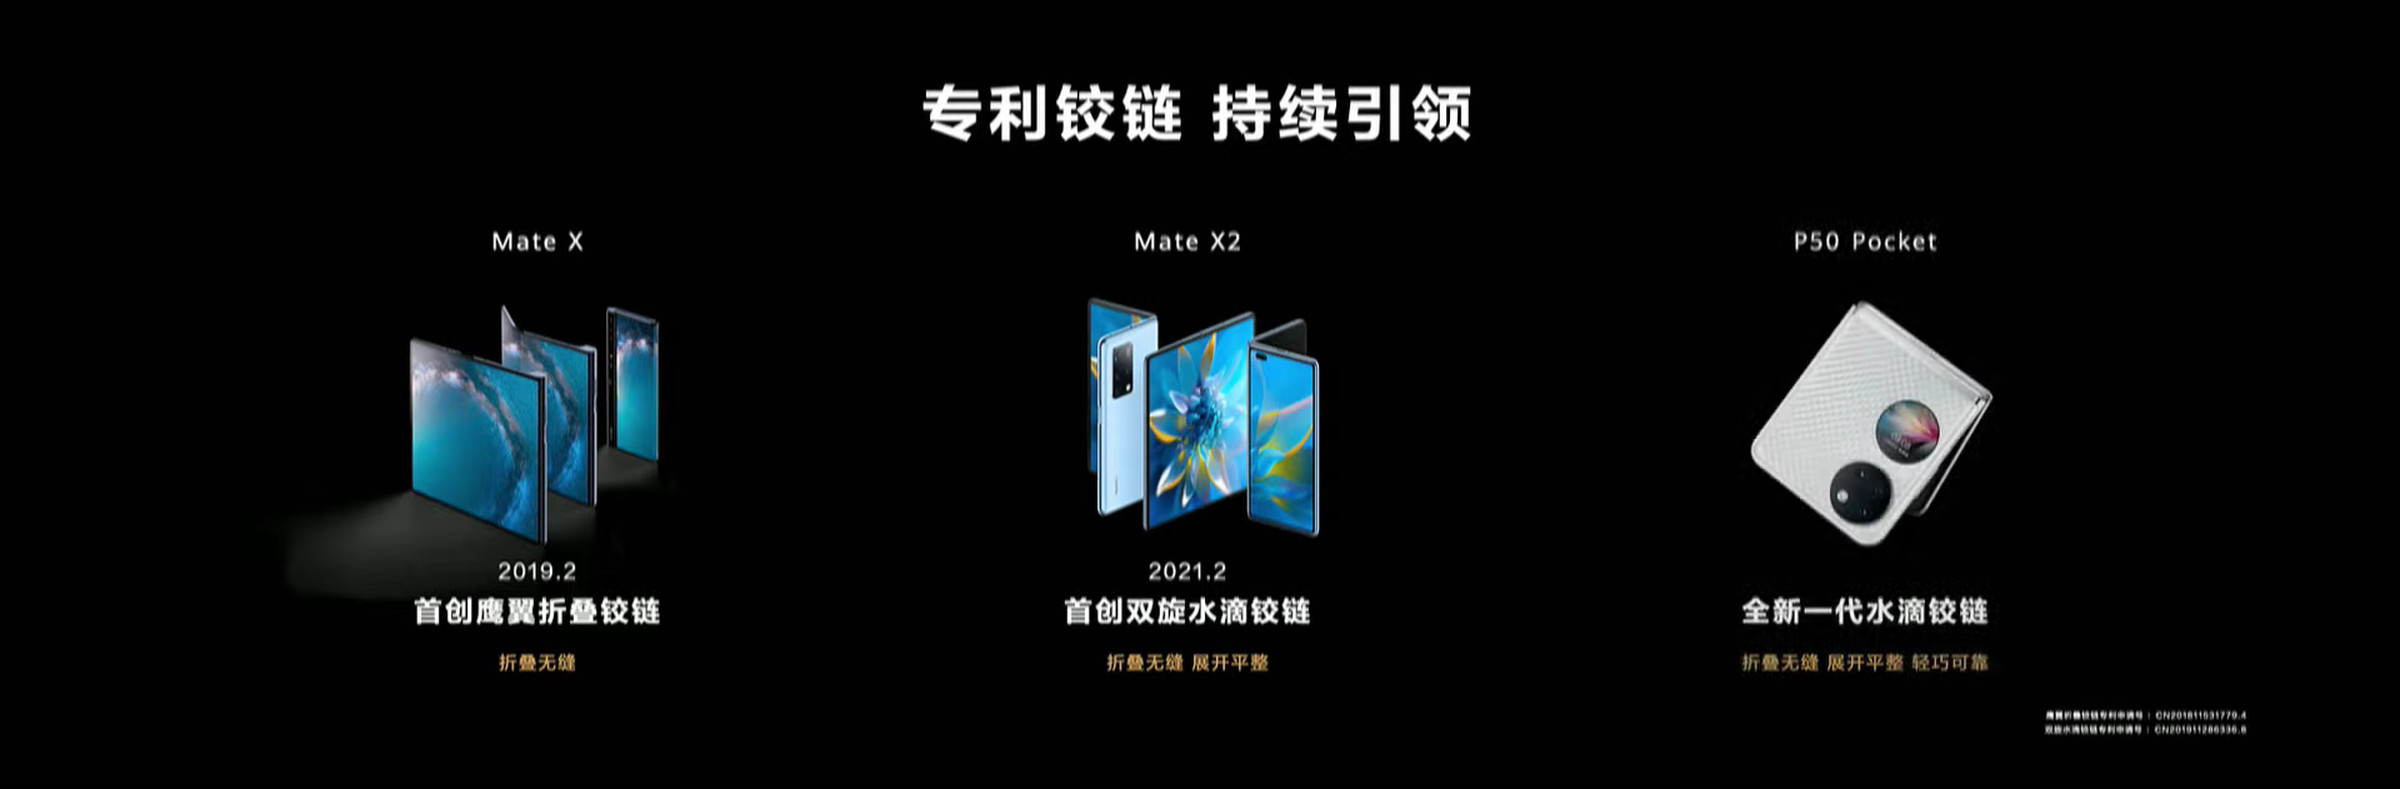 The P50 Pocket is Huawei’s third foldable phone, but its first to use a clamshell design. 